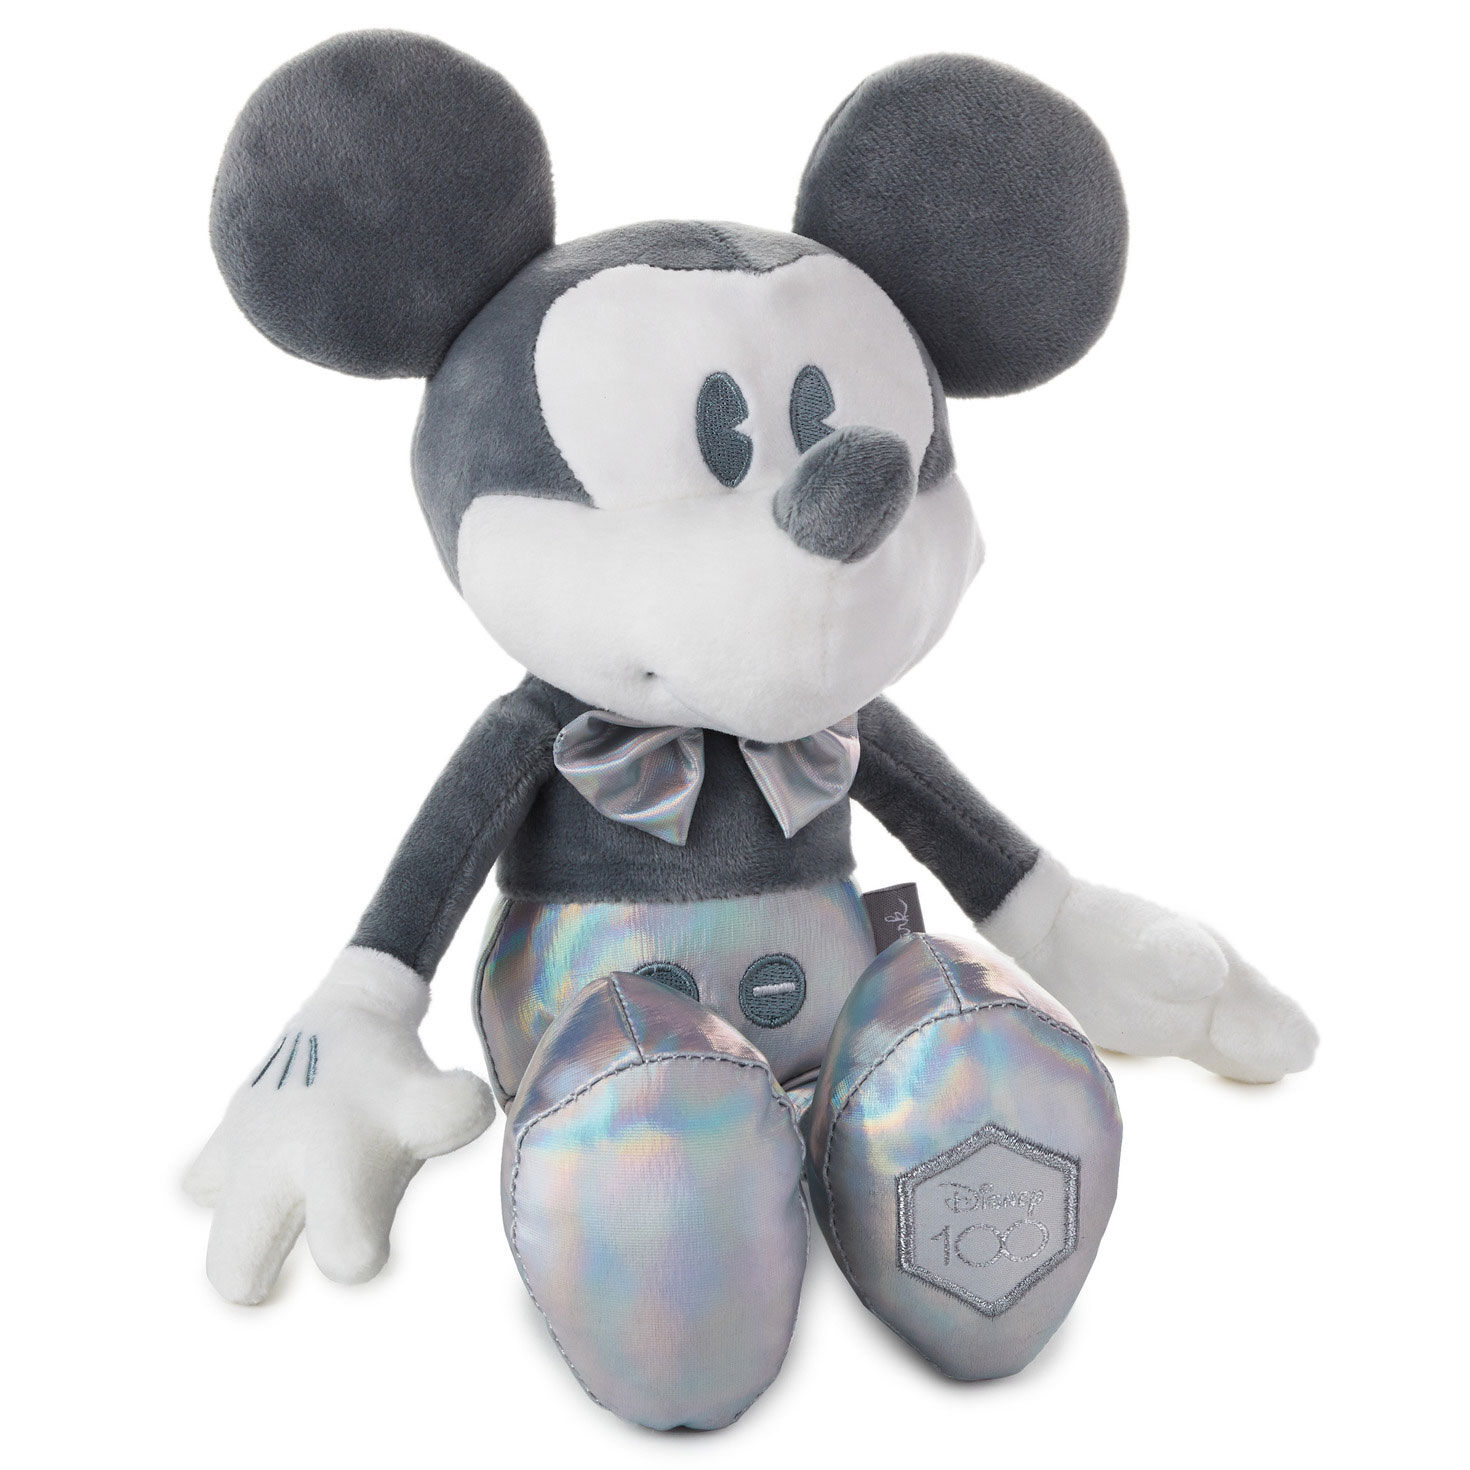 Magic Key Holder Exclusive Disney100 Mickey and Minnie Mouse